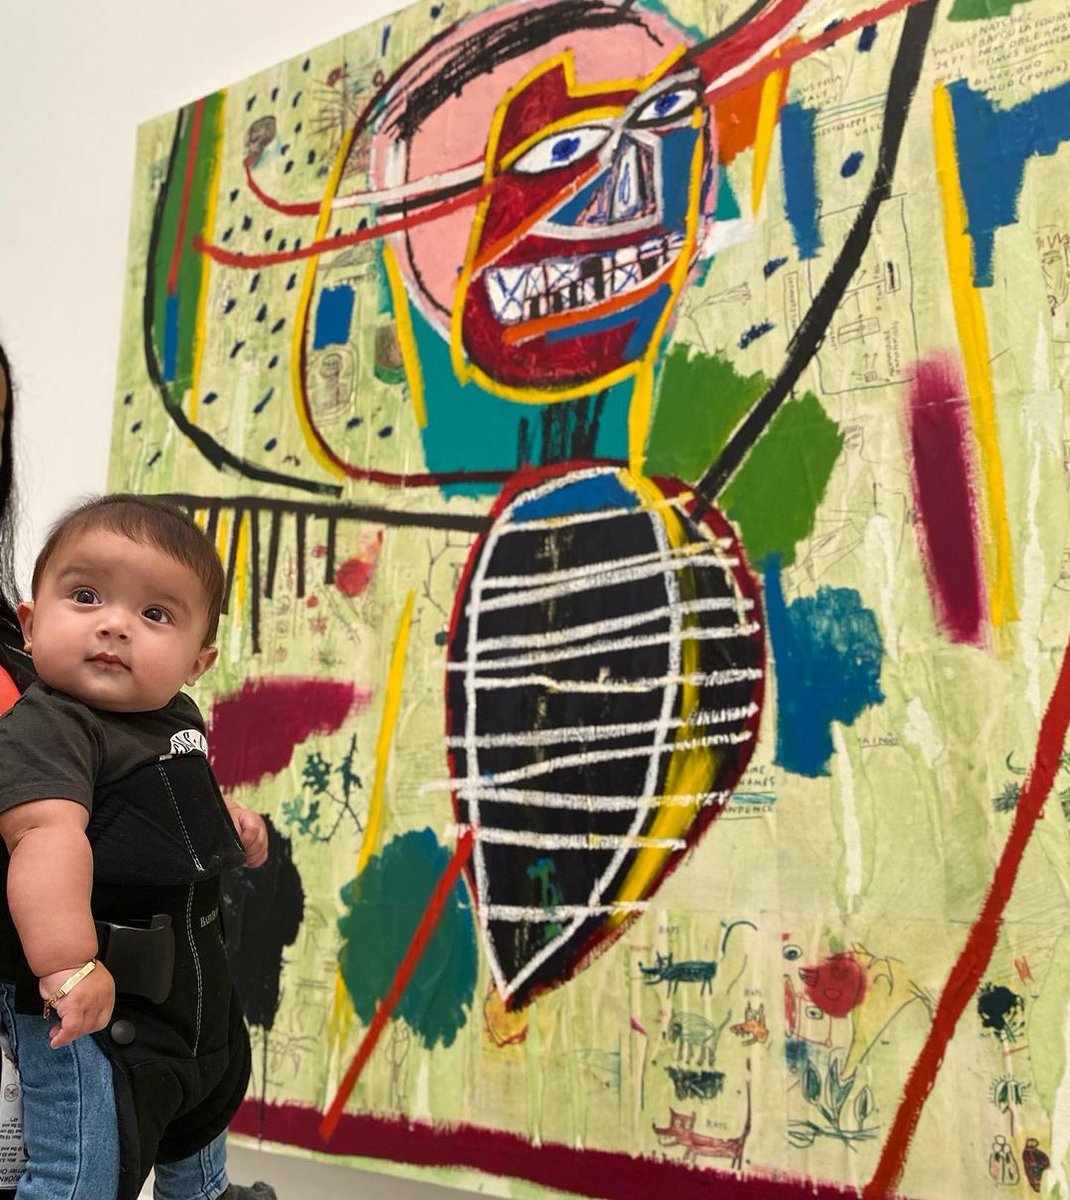 Baby, meet Basquiat. You’re never too young to spend your day with art! We offer free general admission to our leading collections of postwar and contemporary art. Visit and spend some time with your family. 📸: Killakamp21 on Instagram